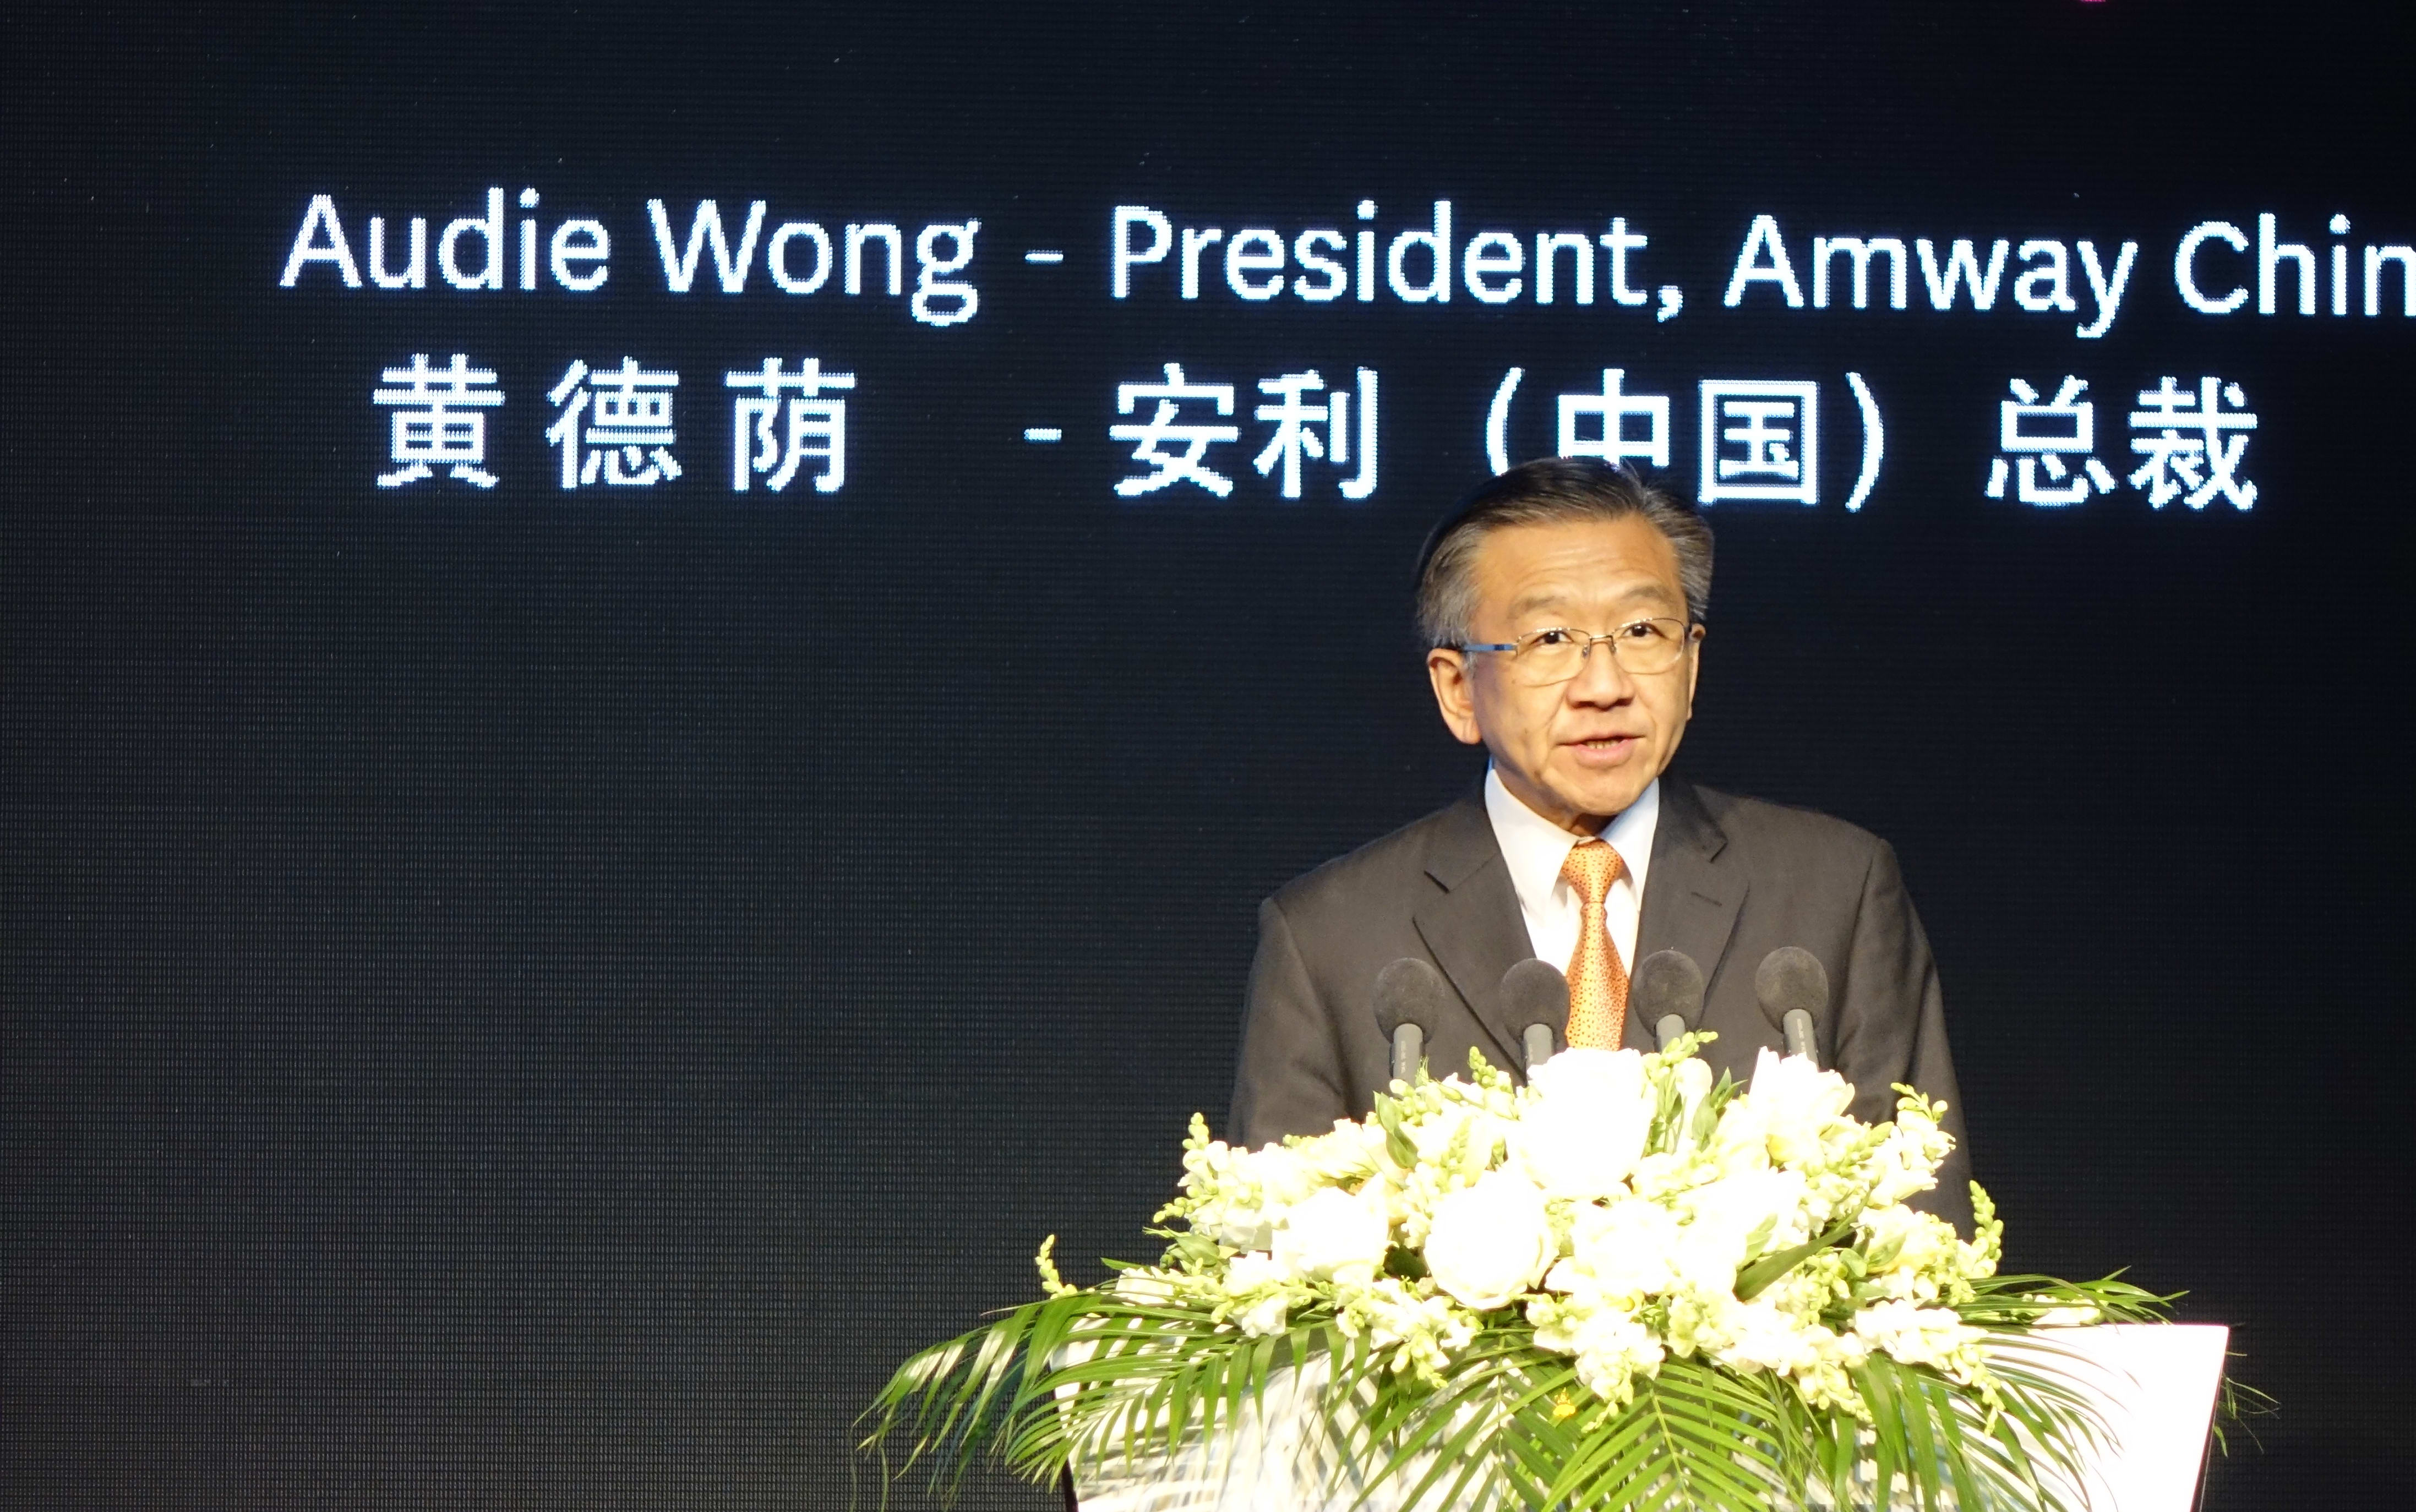 Amway China president Audie Wong at the announcement of Queenstown's winning bid for 10,000 employees to visit it in 2018.